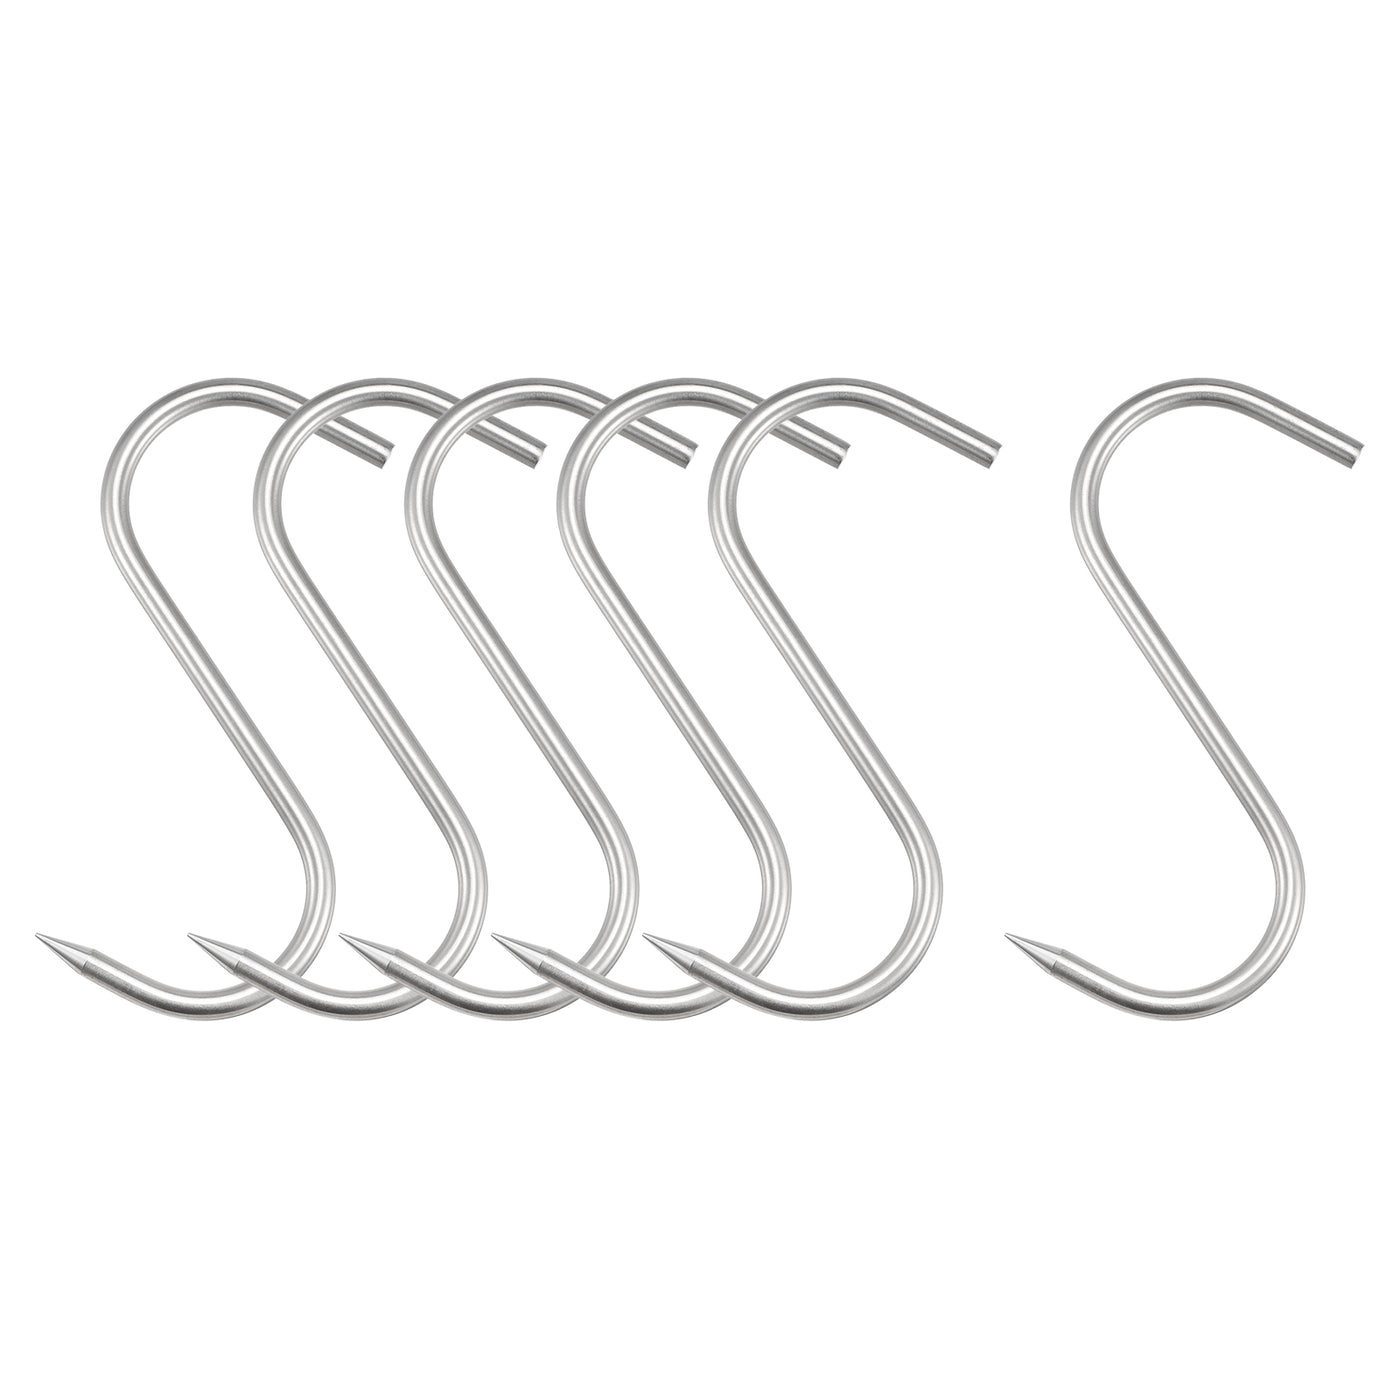 uxcell Uxcell Meat Hooks, Stainless Steel S-Hook, Meat Processing for Chicken Beef Hanging Drying Smoking